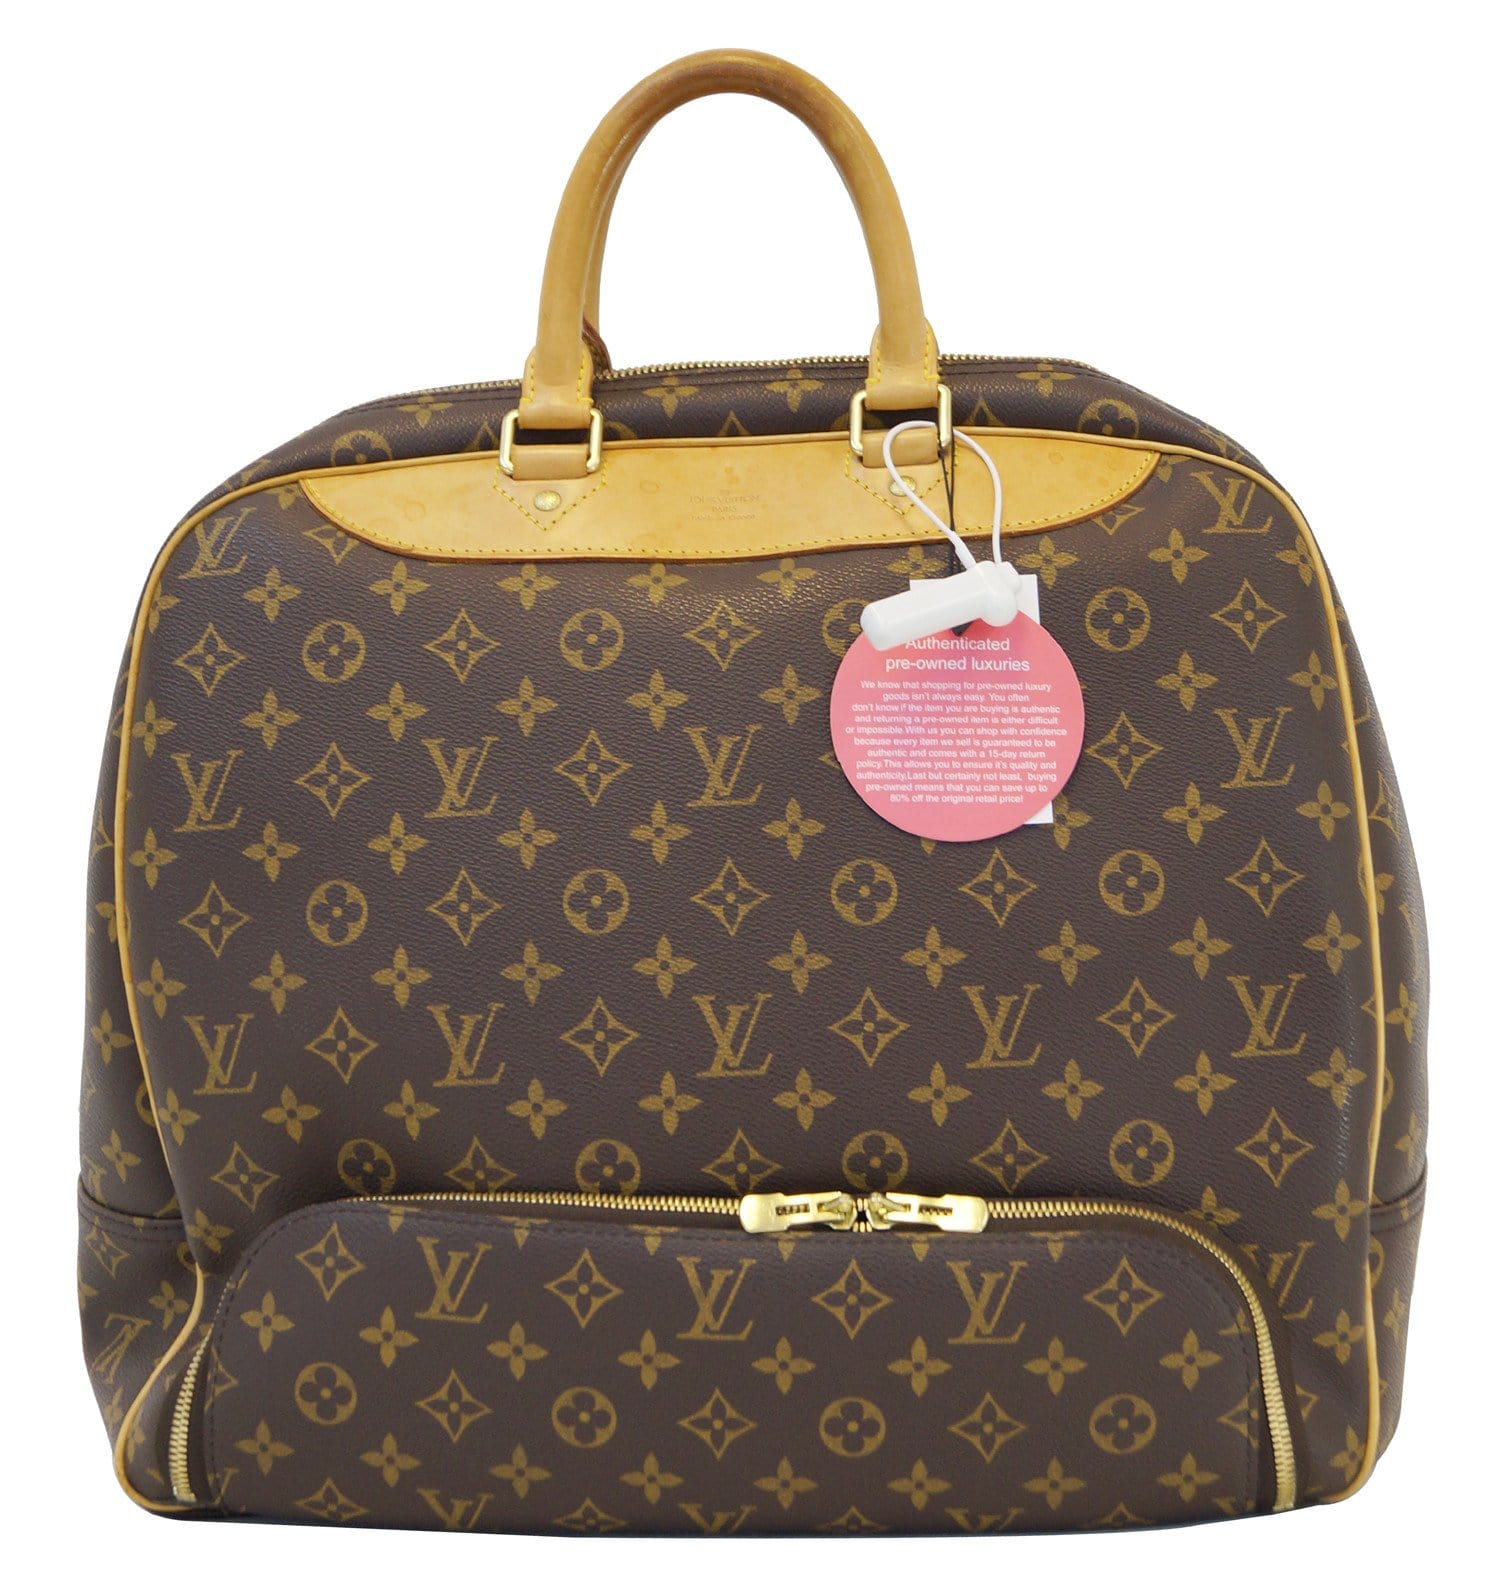 Find the perfect travel bag for you, from Dior, Fendi, Louis Vuitton